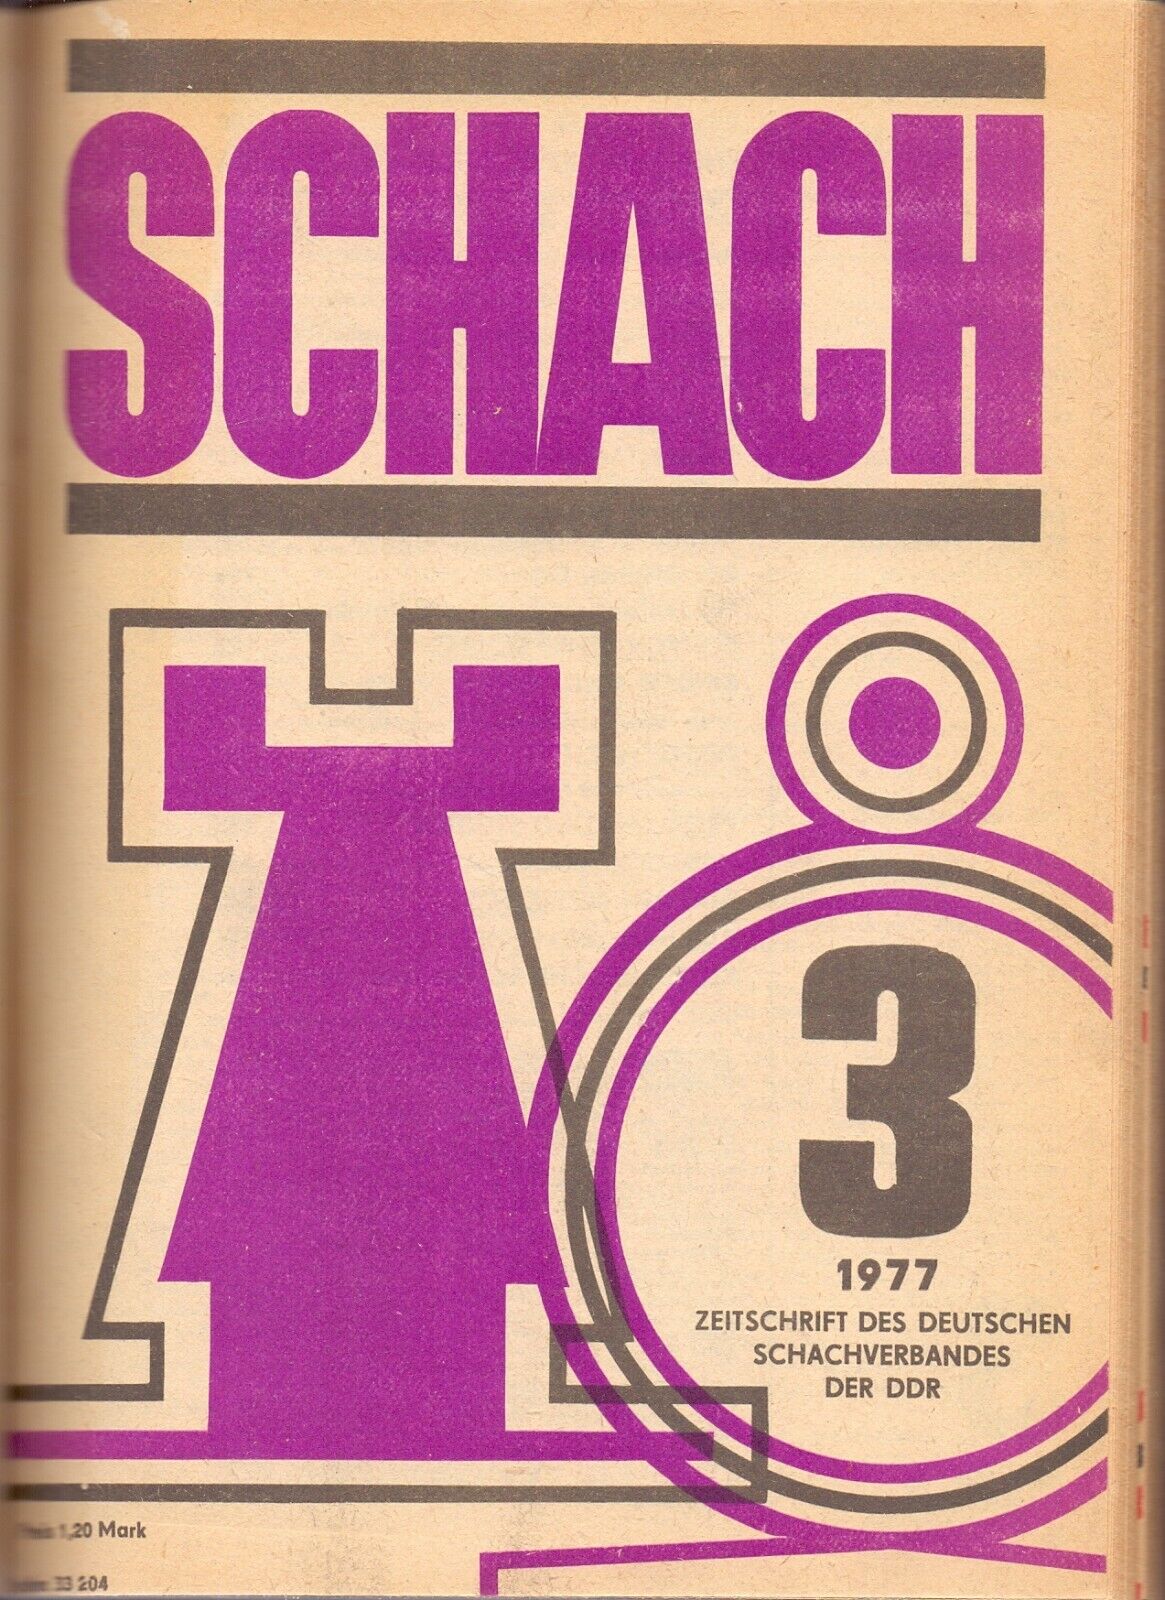 11319.German chess magazine «Schach». Annual sets 1977 and 1983